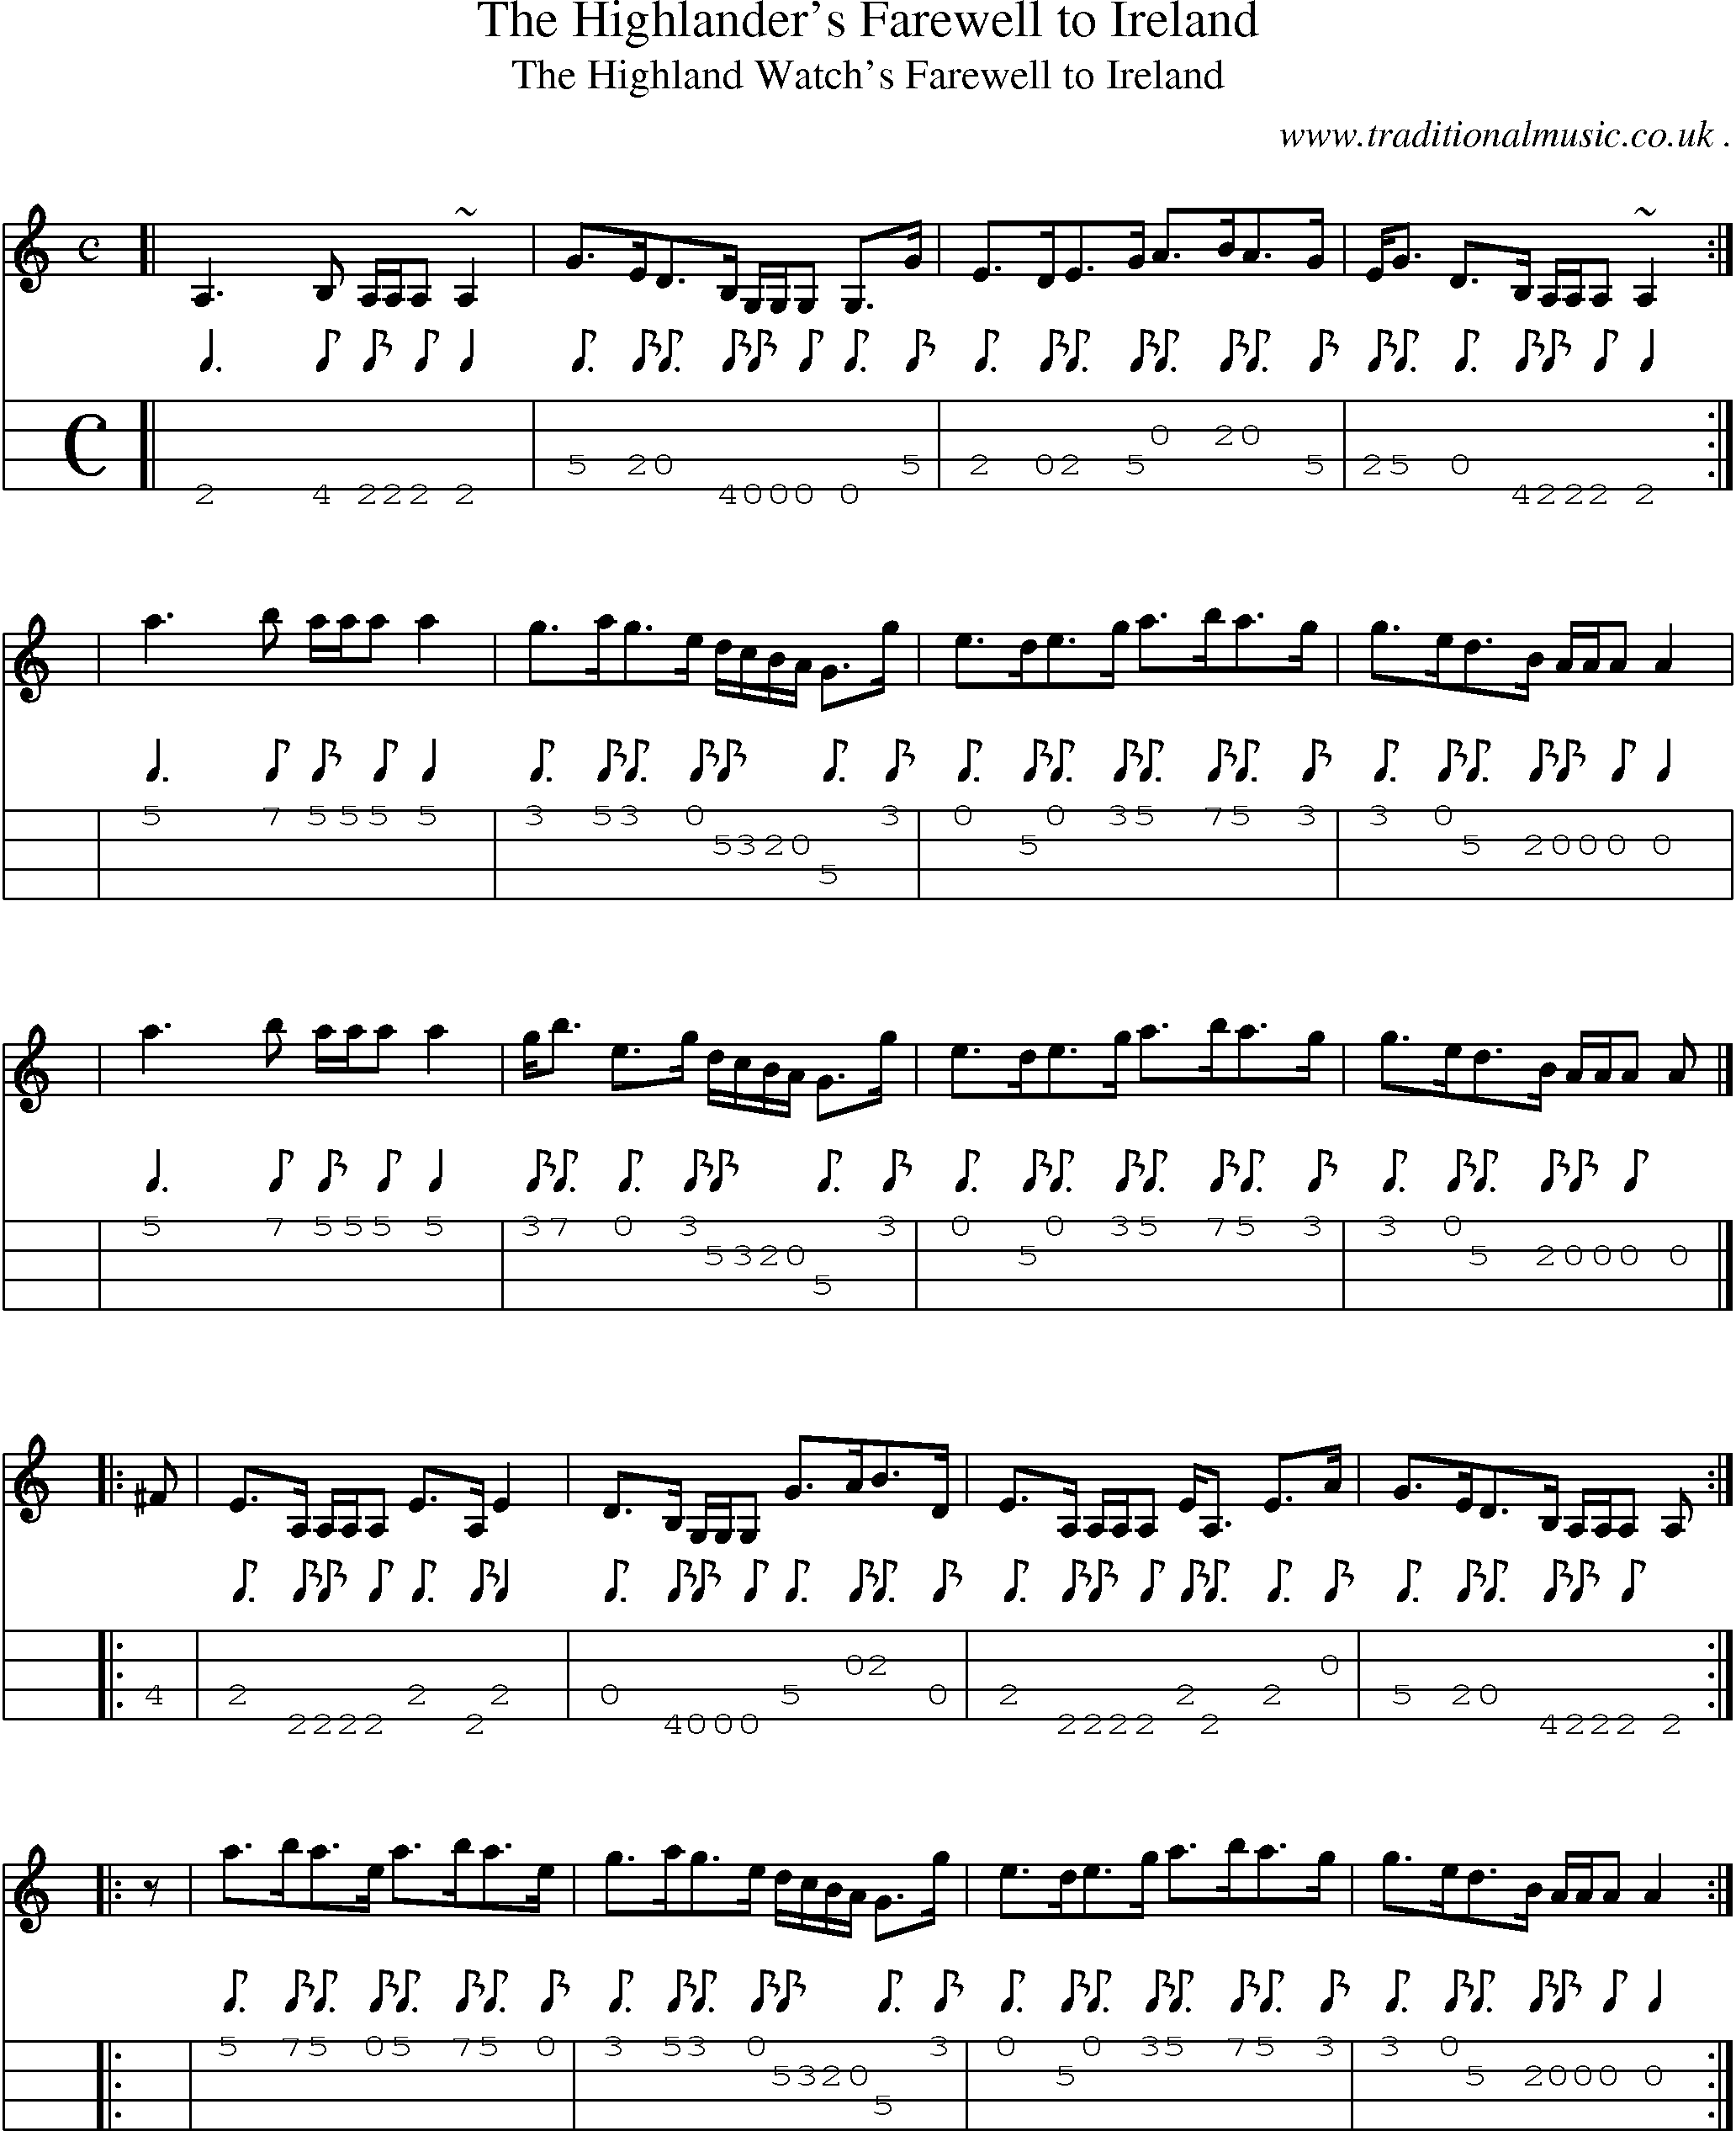 Sheet-music  score, Chords and Mandolin Tabs for The Highlanders Farewell To Ireland1